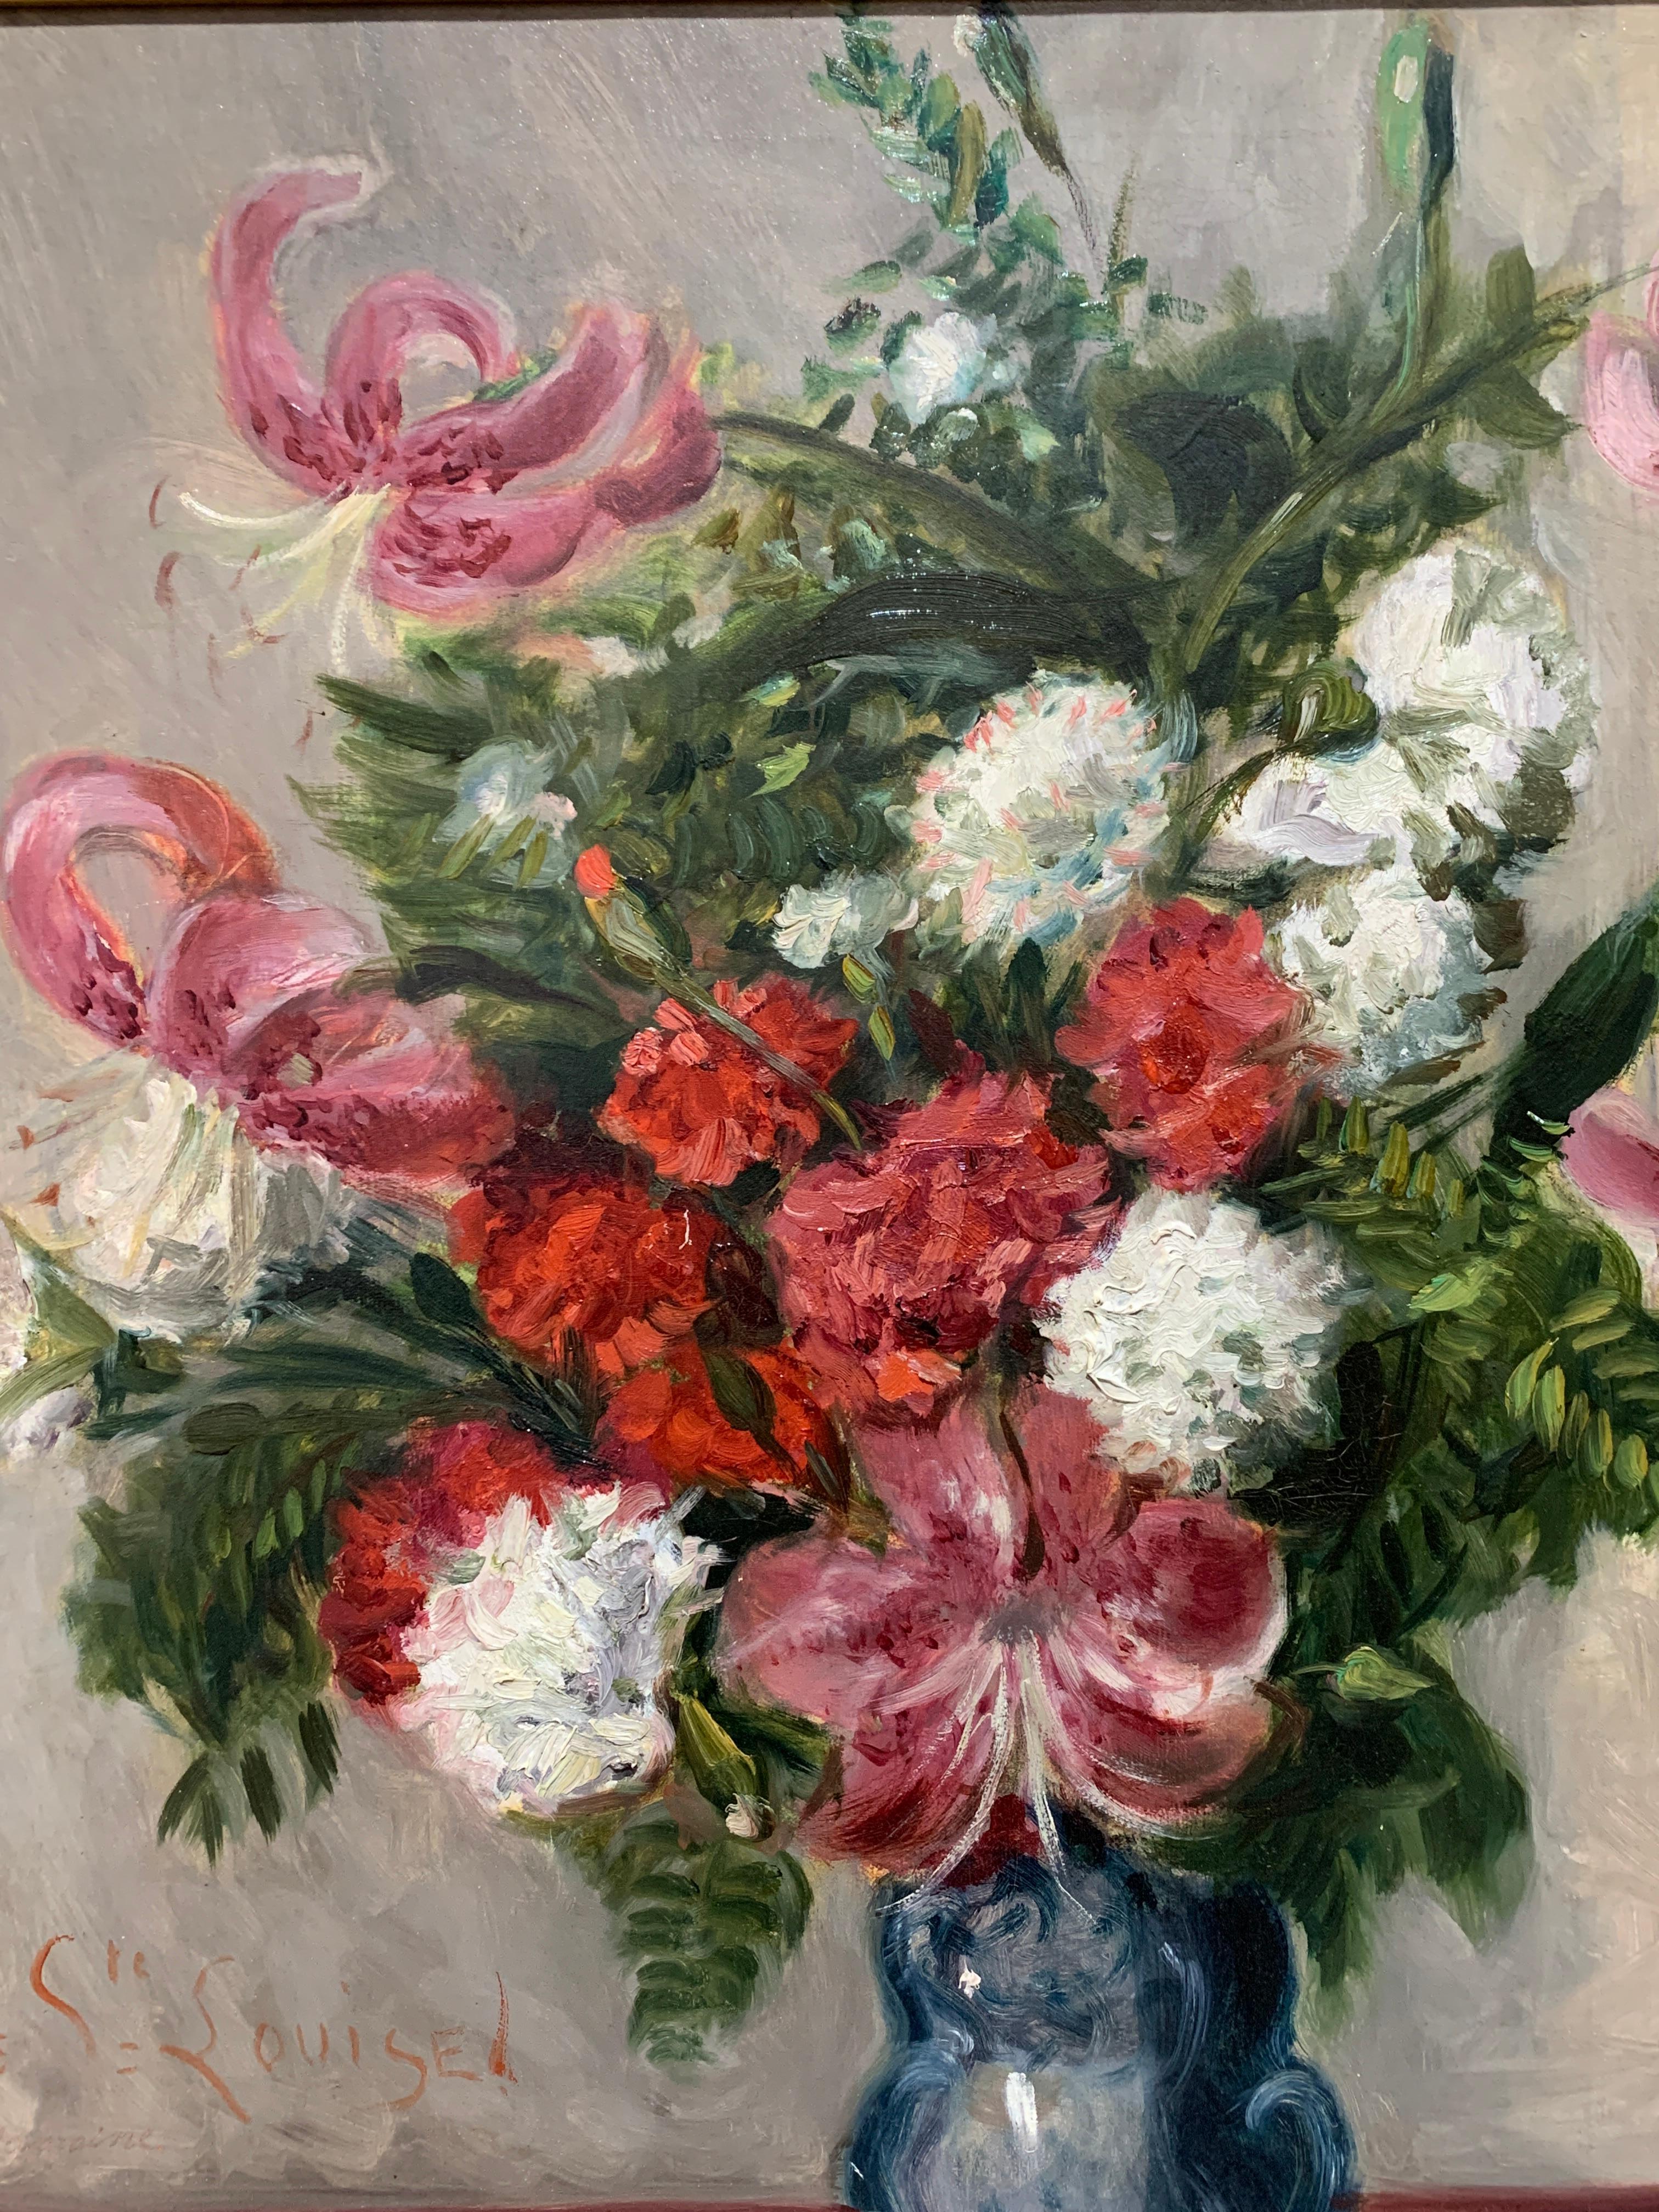 Impressionist still life of Pink, Red and White flowers in an interior. - Painting by Jane Herbo